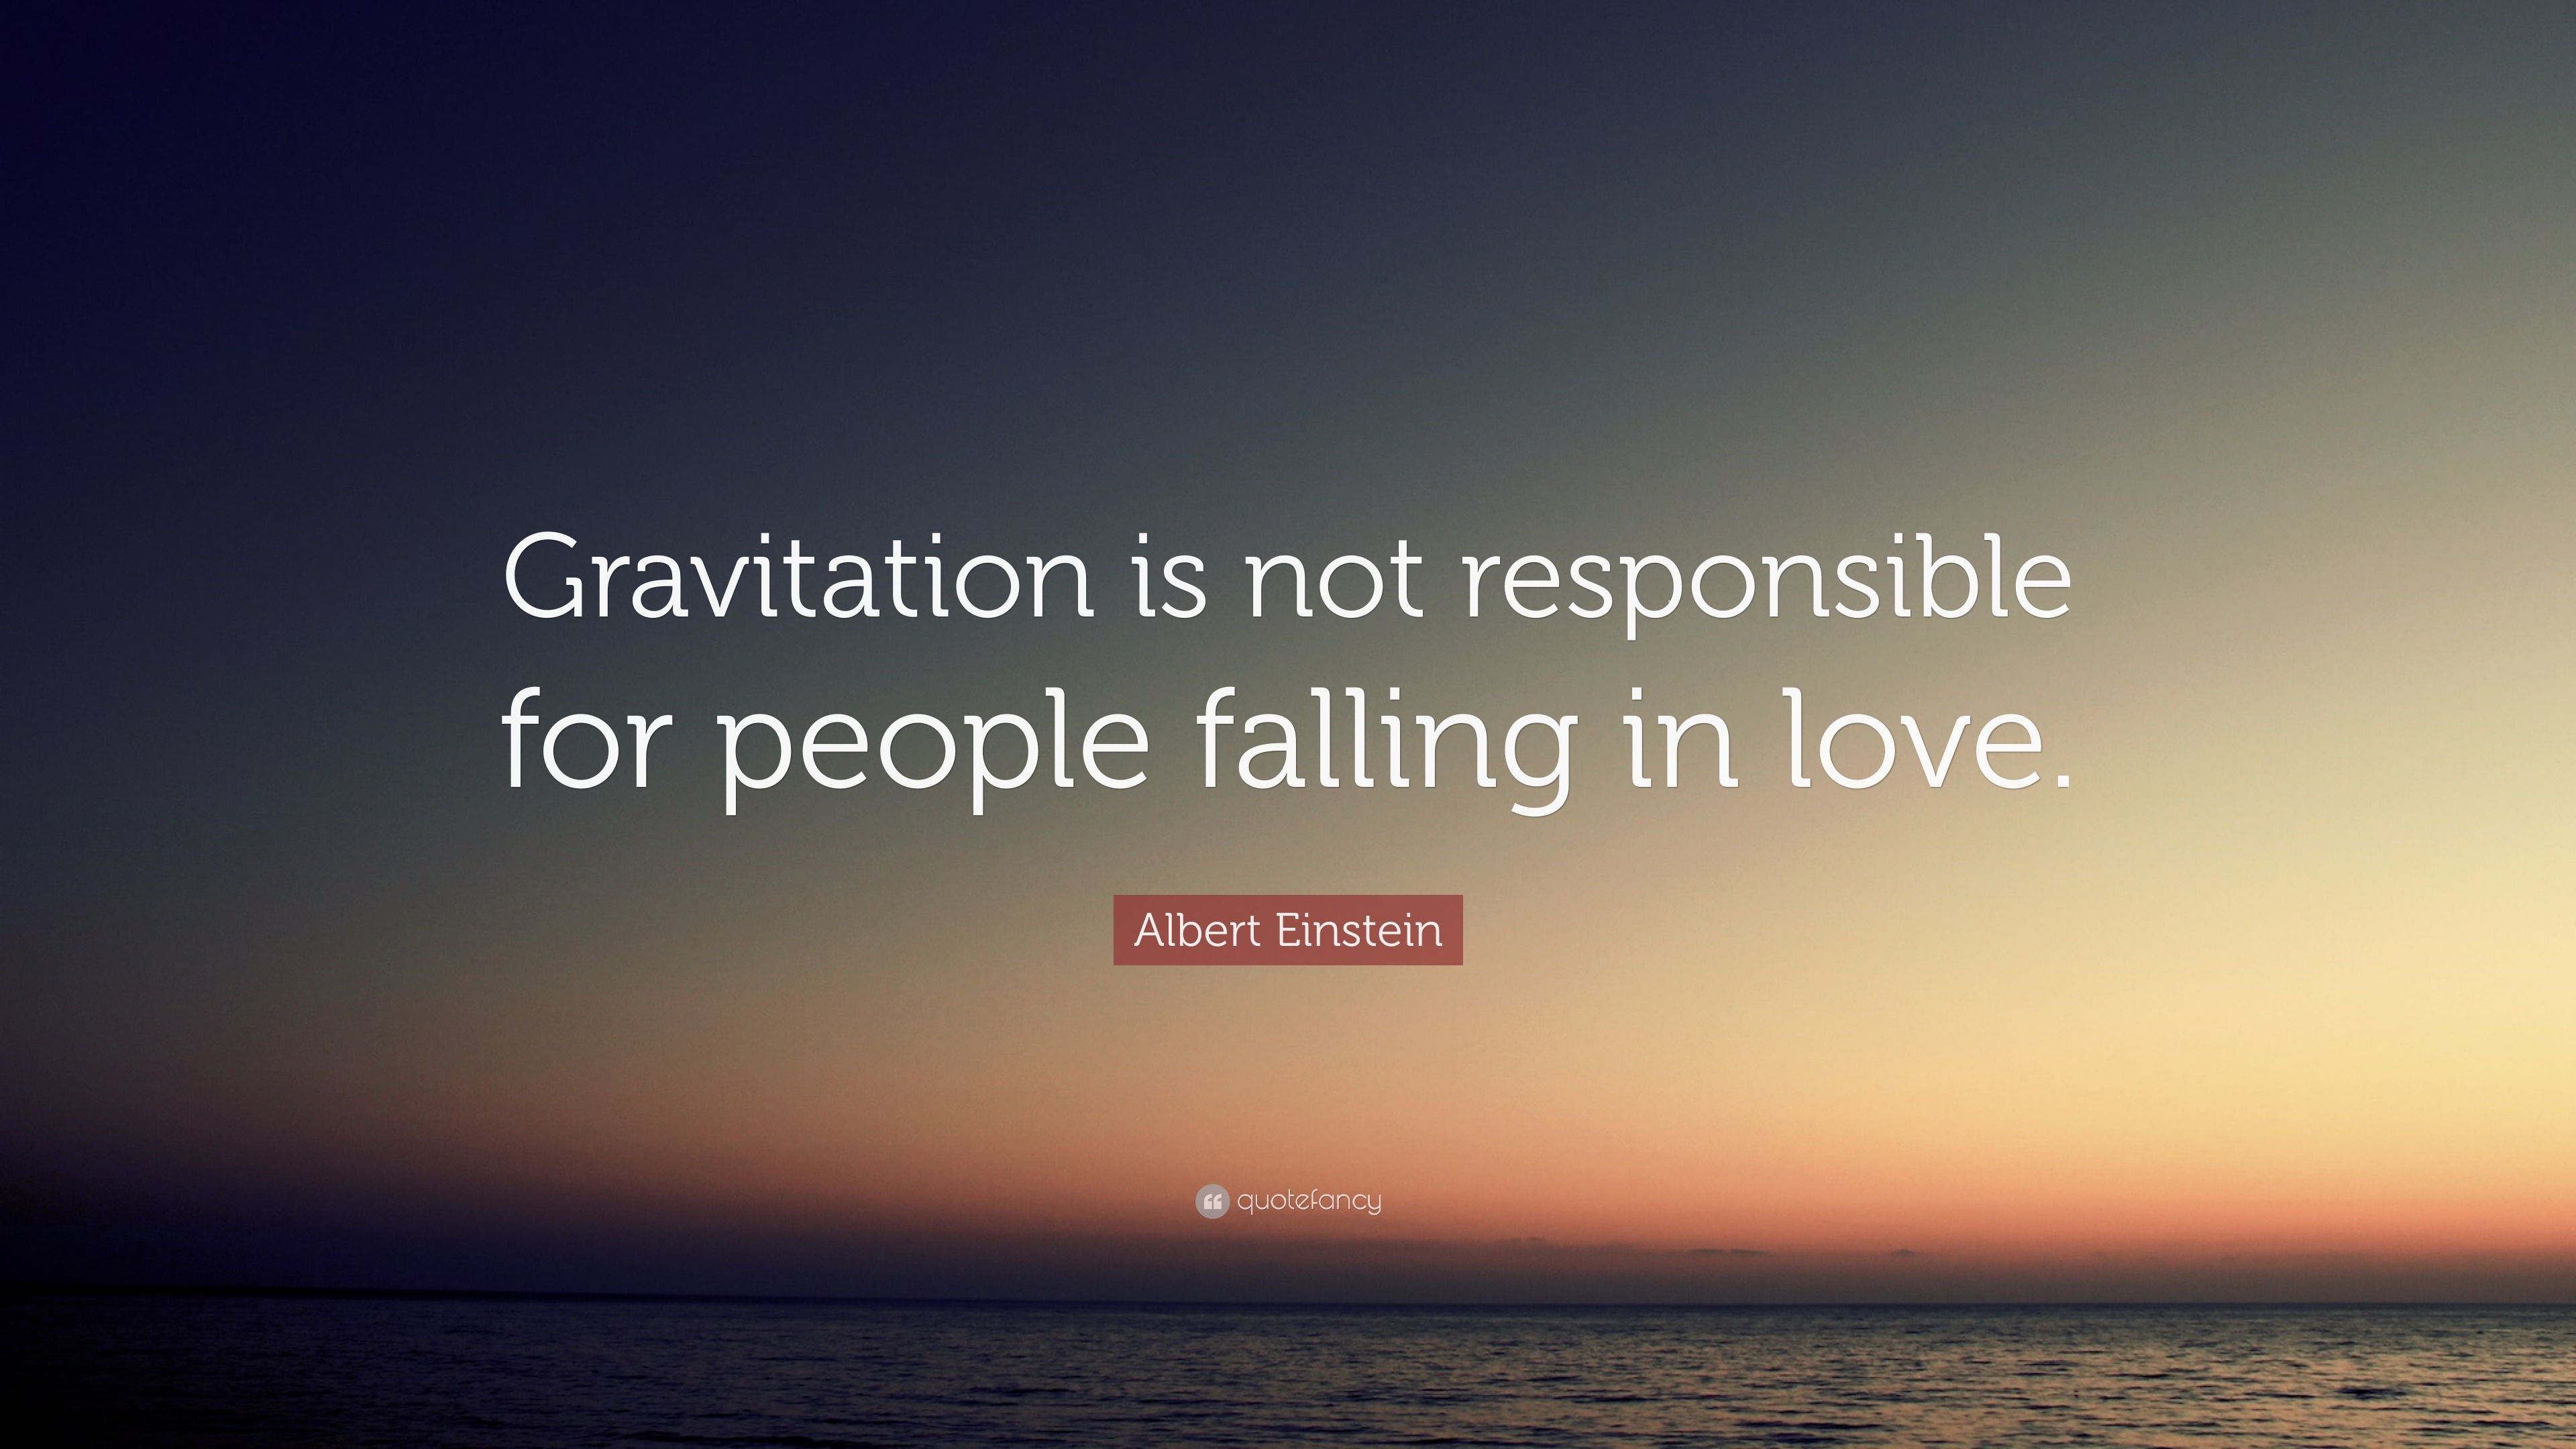 Albert Einstein Quote: "Gravitation is not responsible for people falling in love." (17 ...